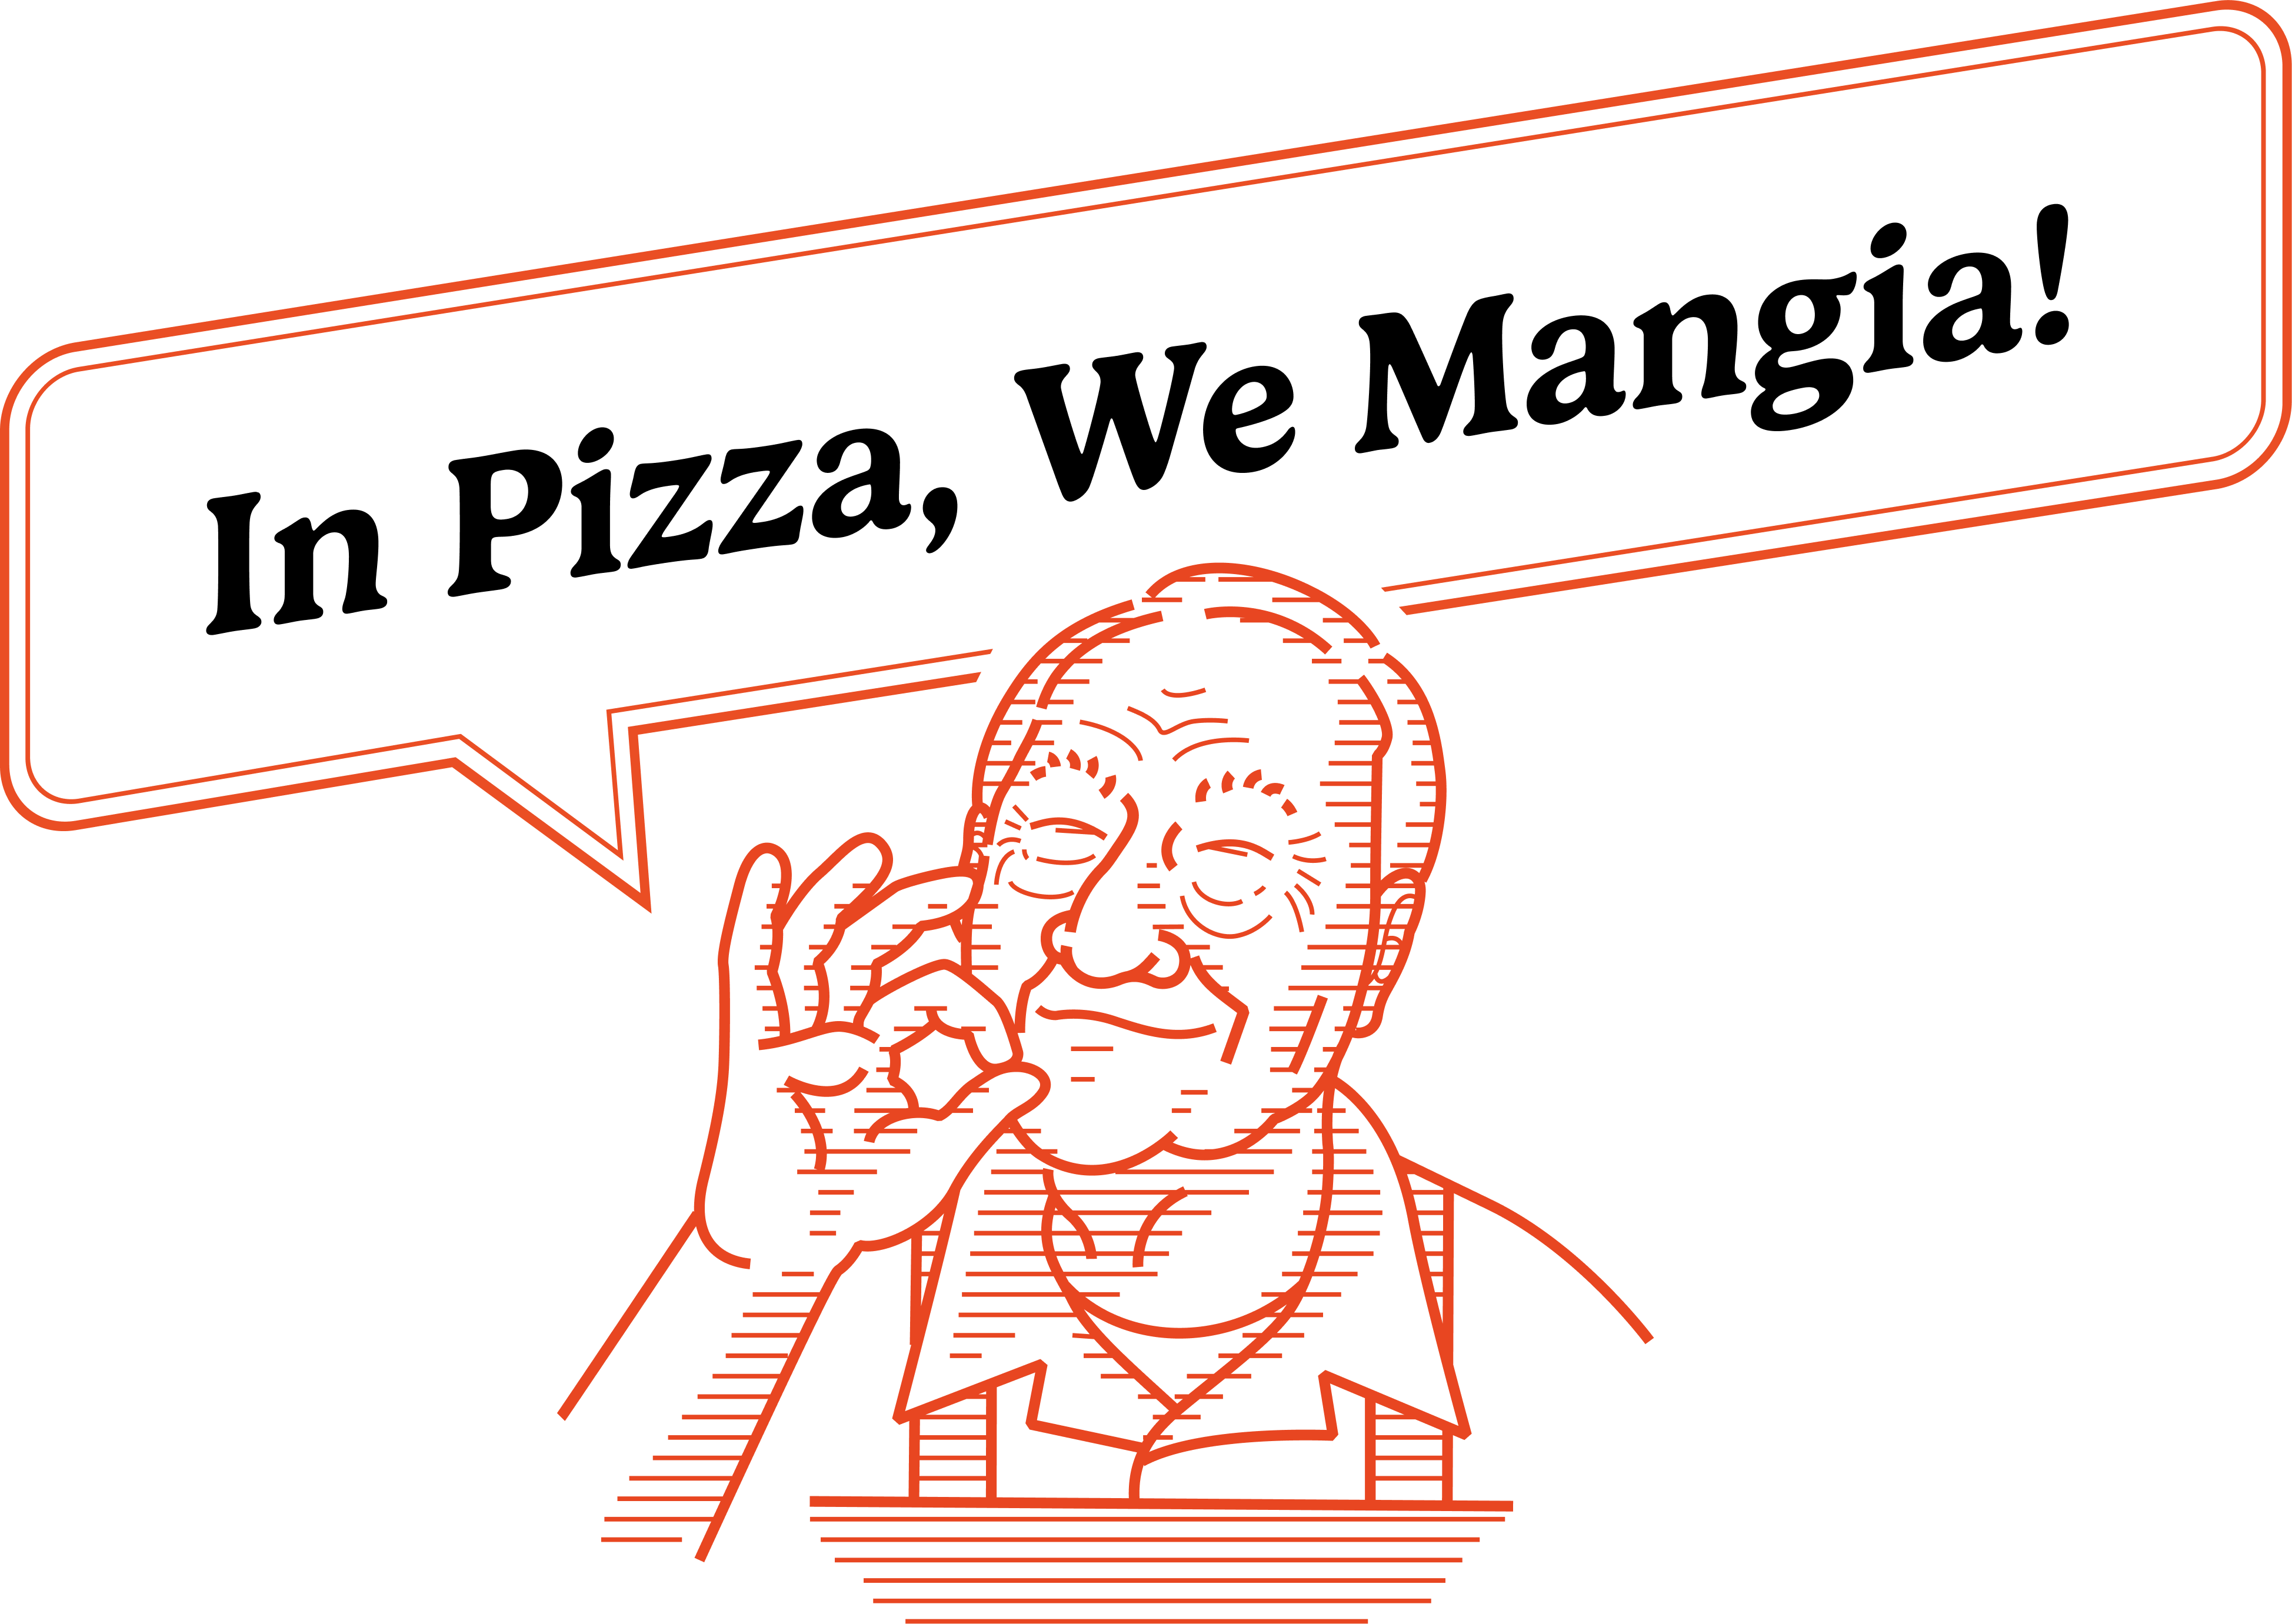 In Pizza, We Mangia!